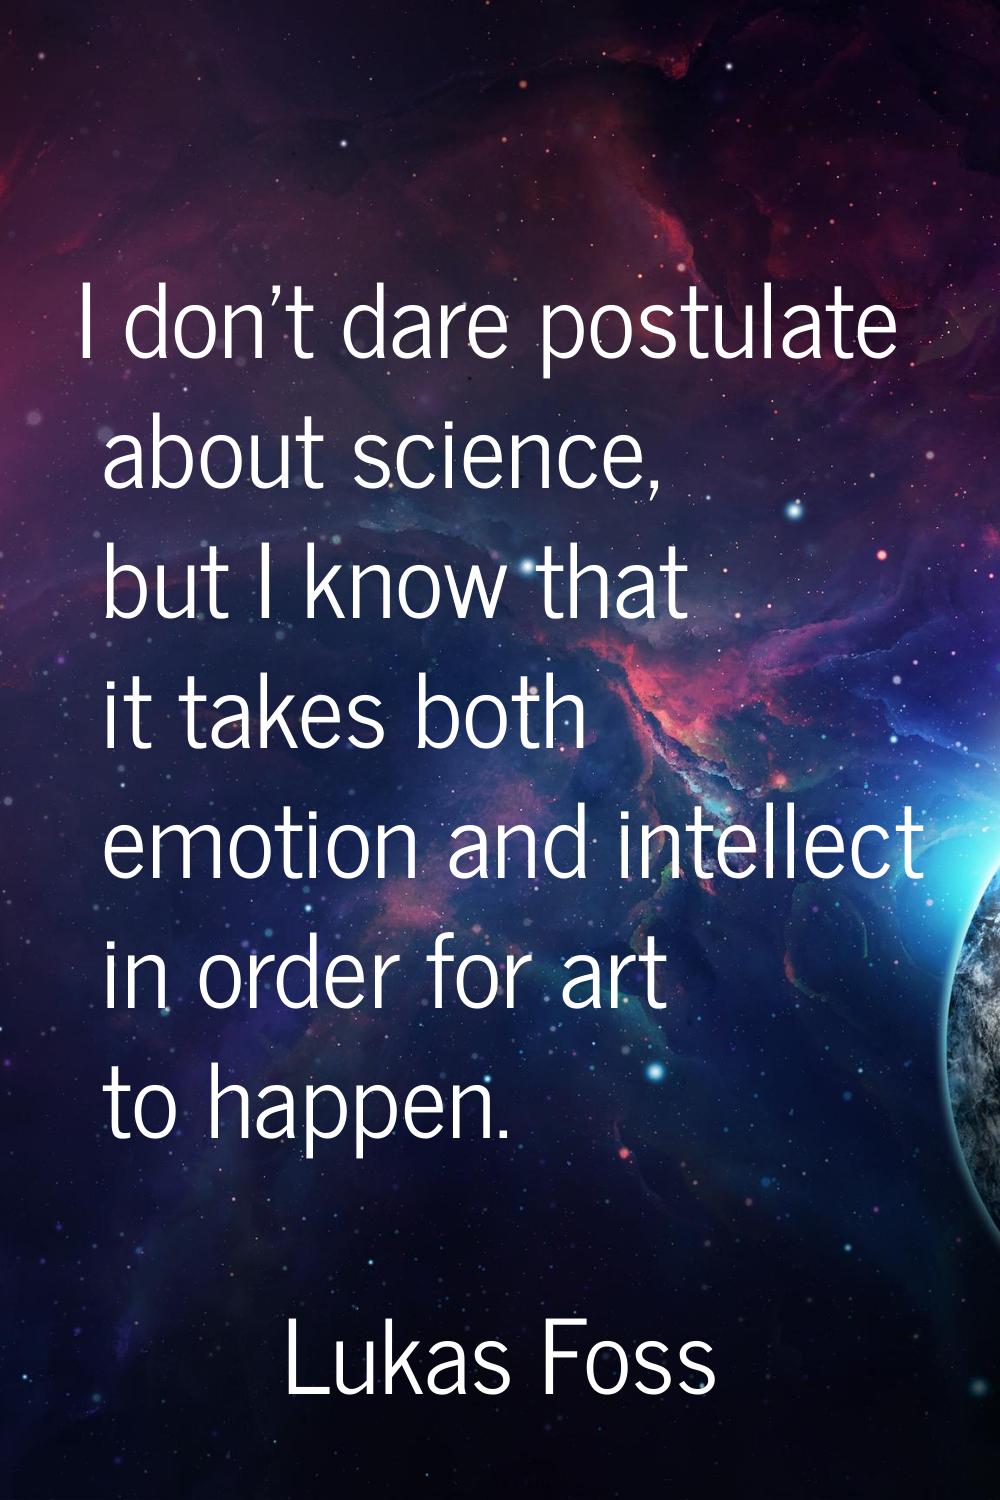 I don't dare postulate about science, but I know that it takes both emotion and intellect in order 